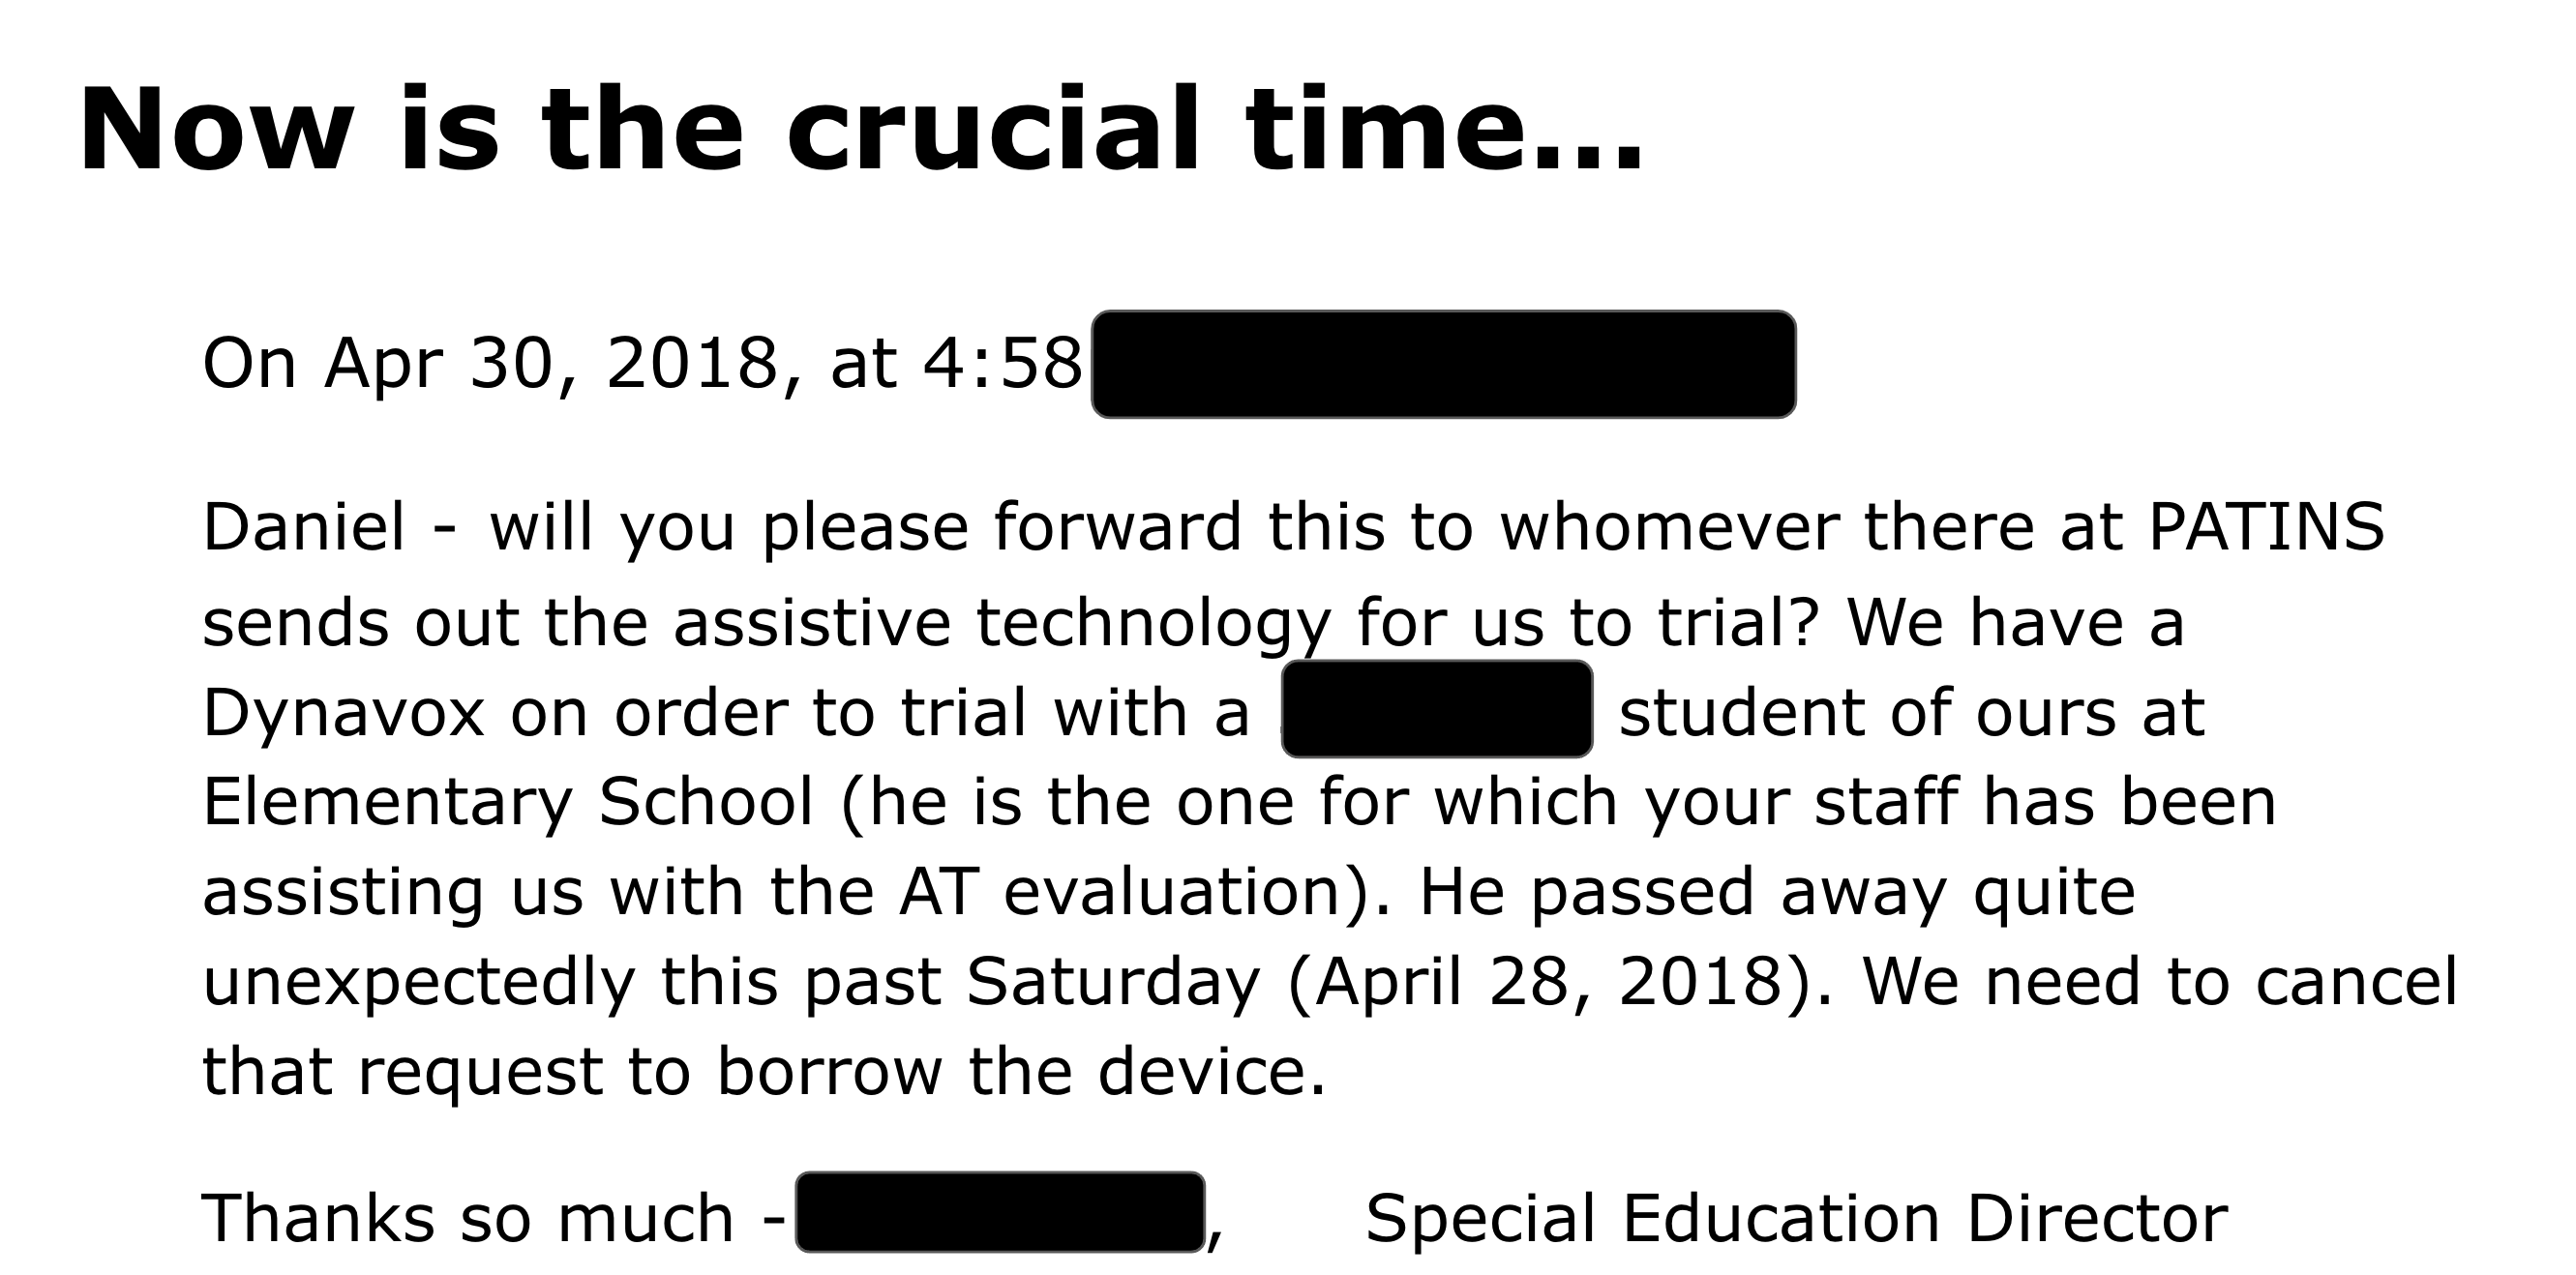 On Apr 30, 2018, at 4:58pm,     Daniel - will you please forward this to whomever there at PATINS sends out the assistive technology for us to trial? We have a Dynavox on order to trial with a 3rd grade student of ours at                Elementary School (he is the one for which your staff has been assisting us with the AT evaluation). He passed away quite unexpectedly this past Saturday (April 28, 2018). We need to cancel that request to borrow the device.  Thanks so much -                  ,      Special Education Director          